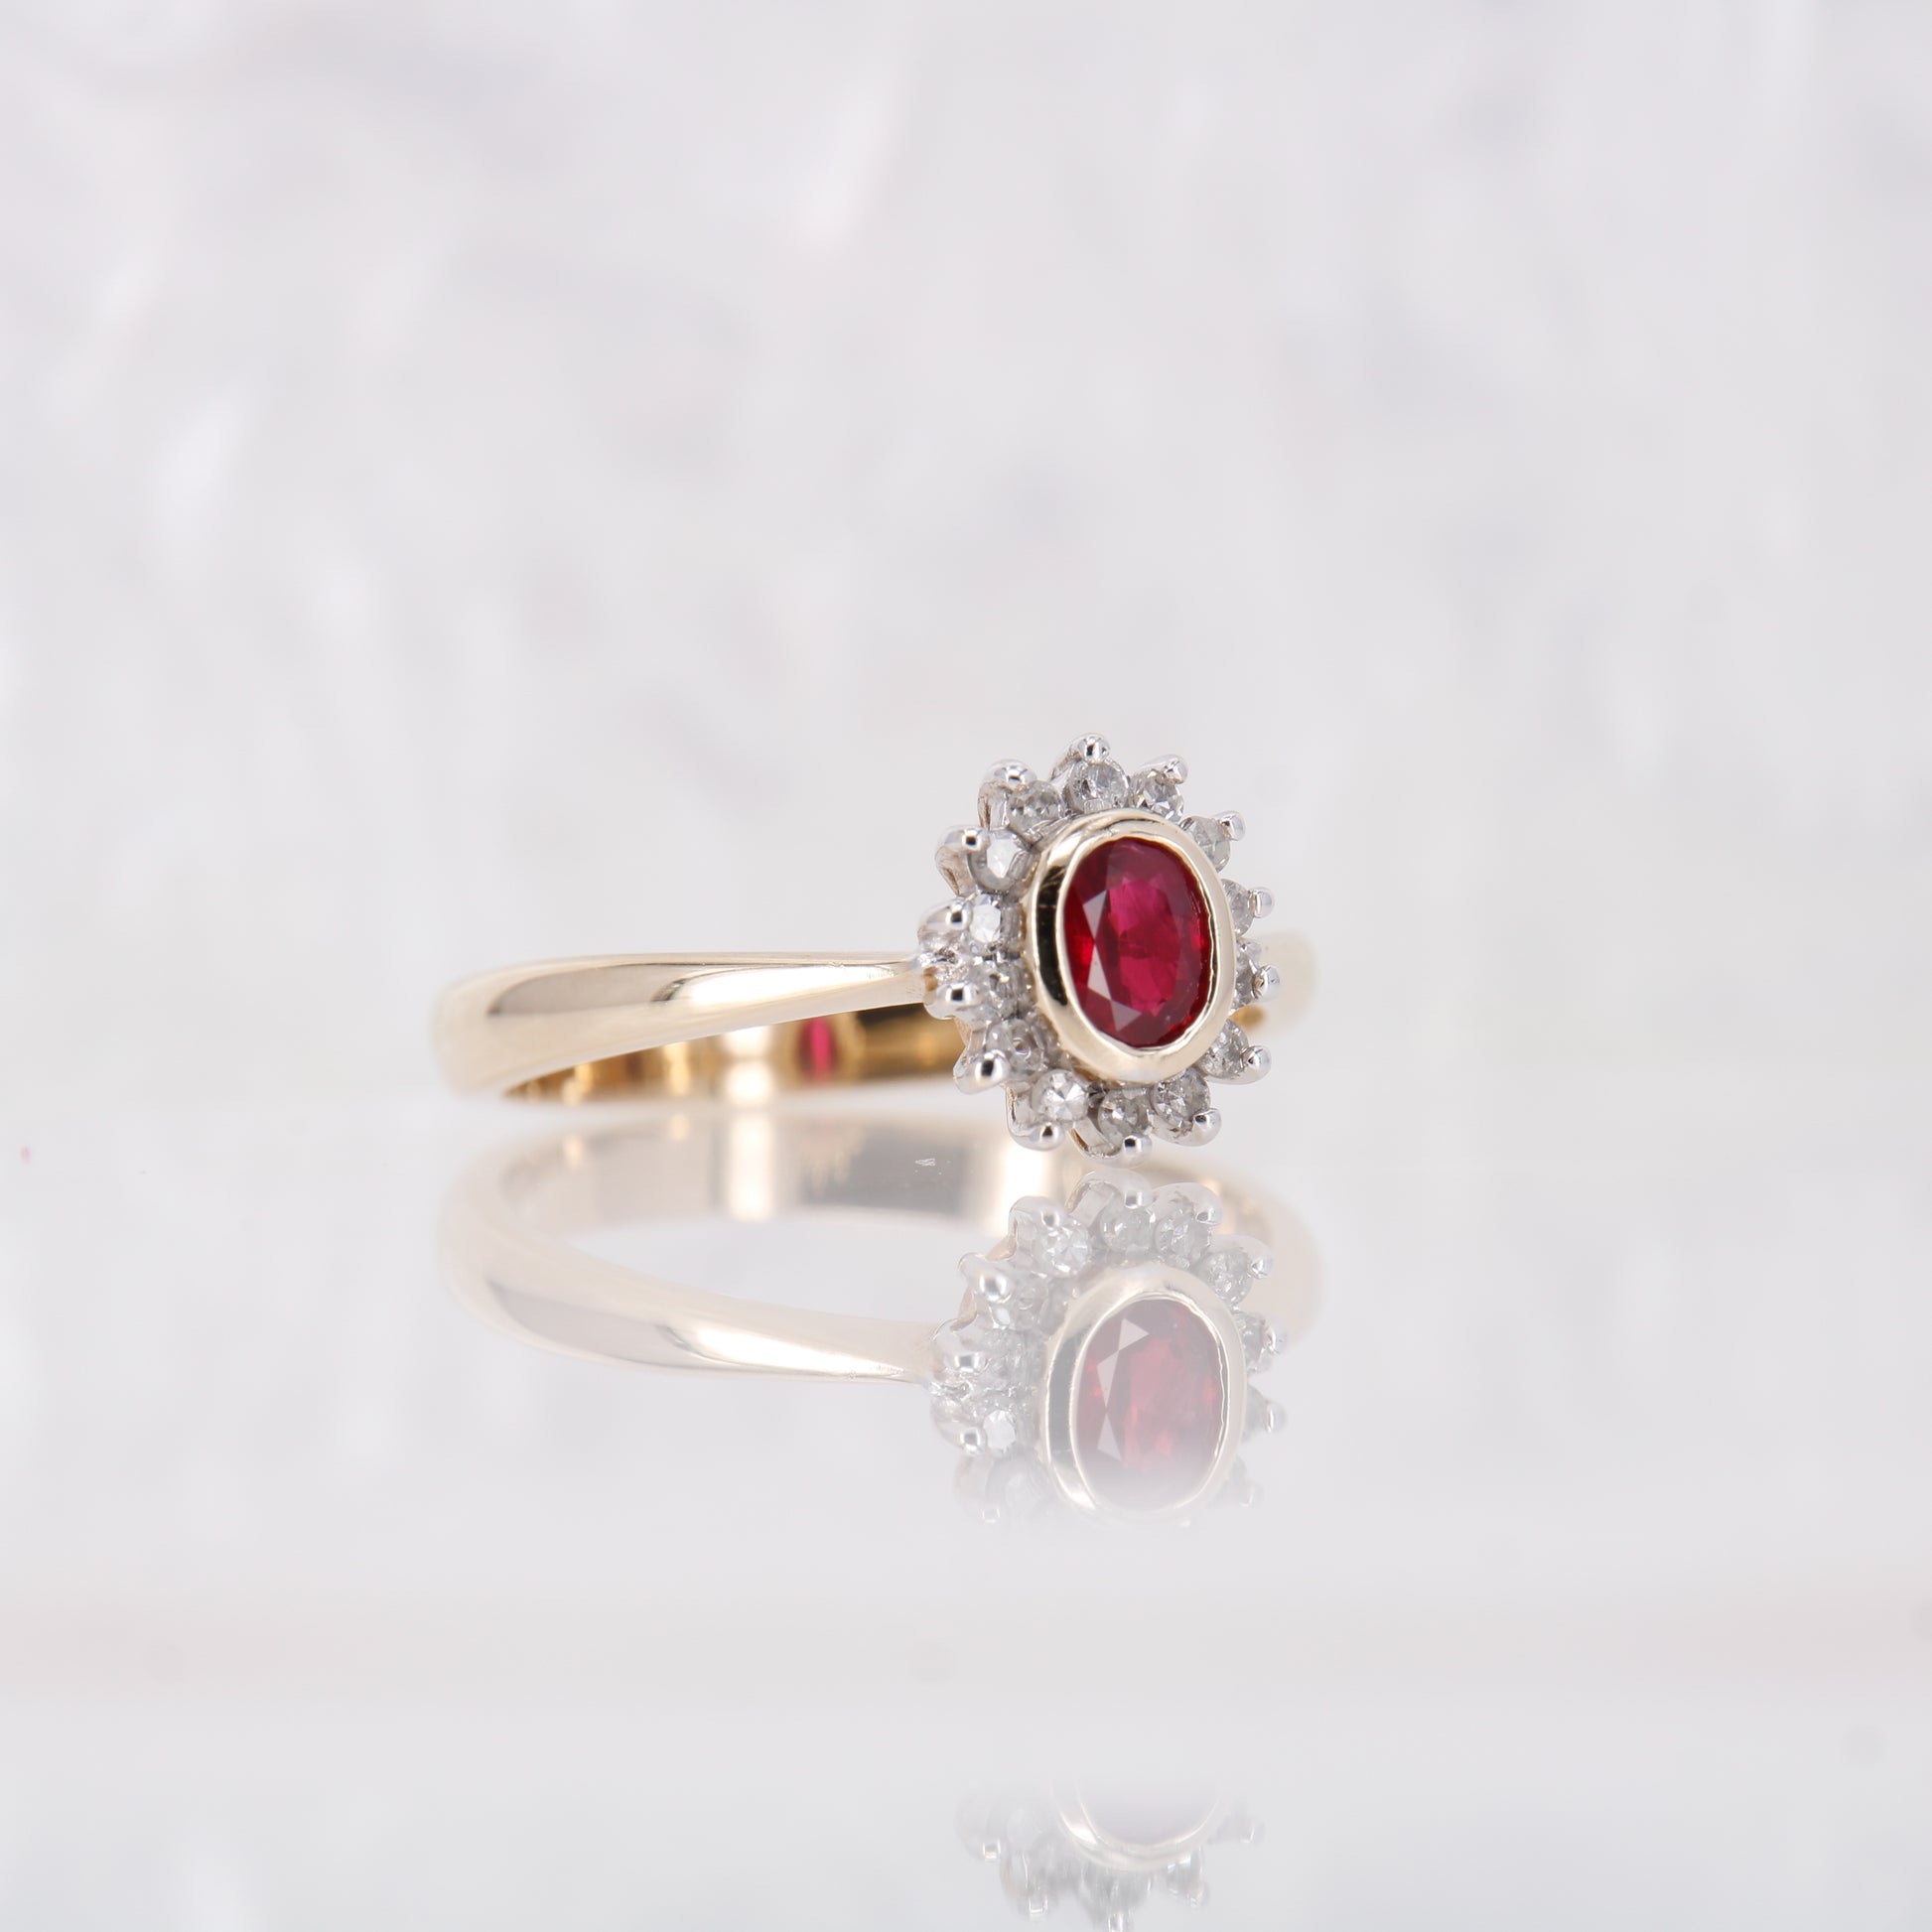 Vintage Garnet and Diamond Ring, Oval Cut Garnet surrounded by a halo of diamonds set in 9ct yellow gold. January birthstone engagement ring.